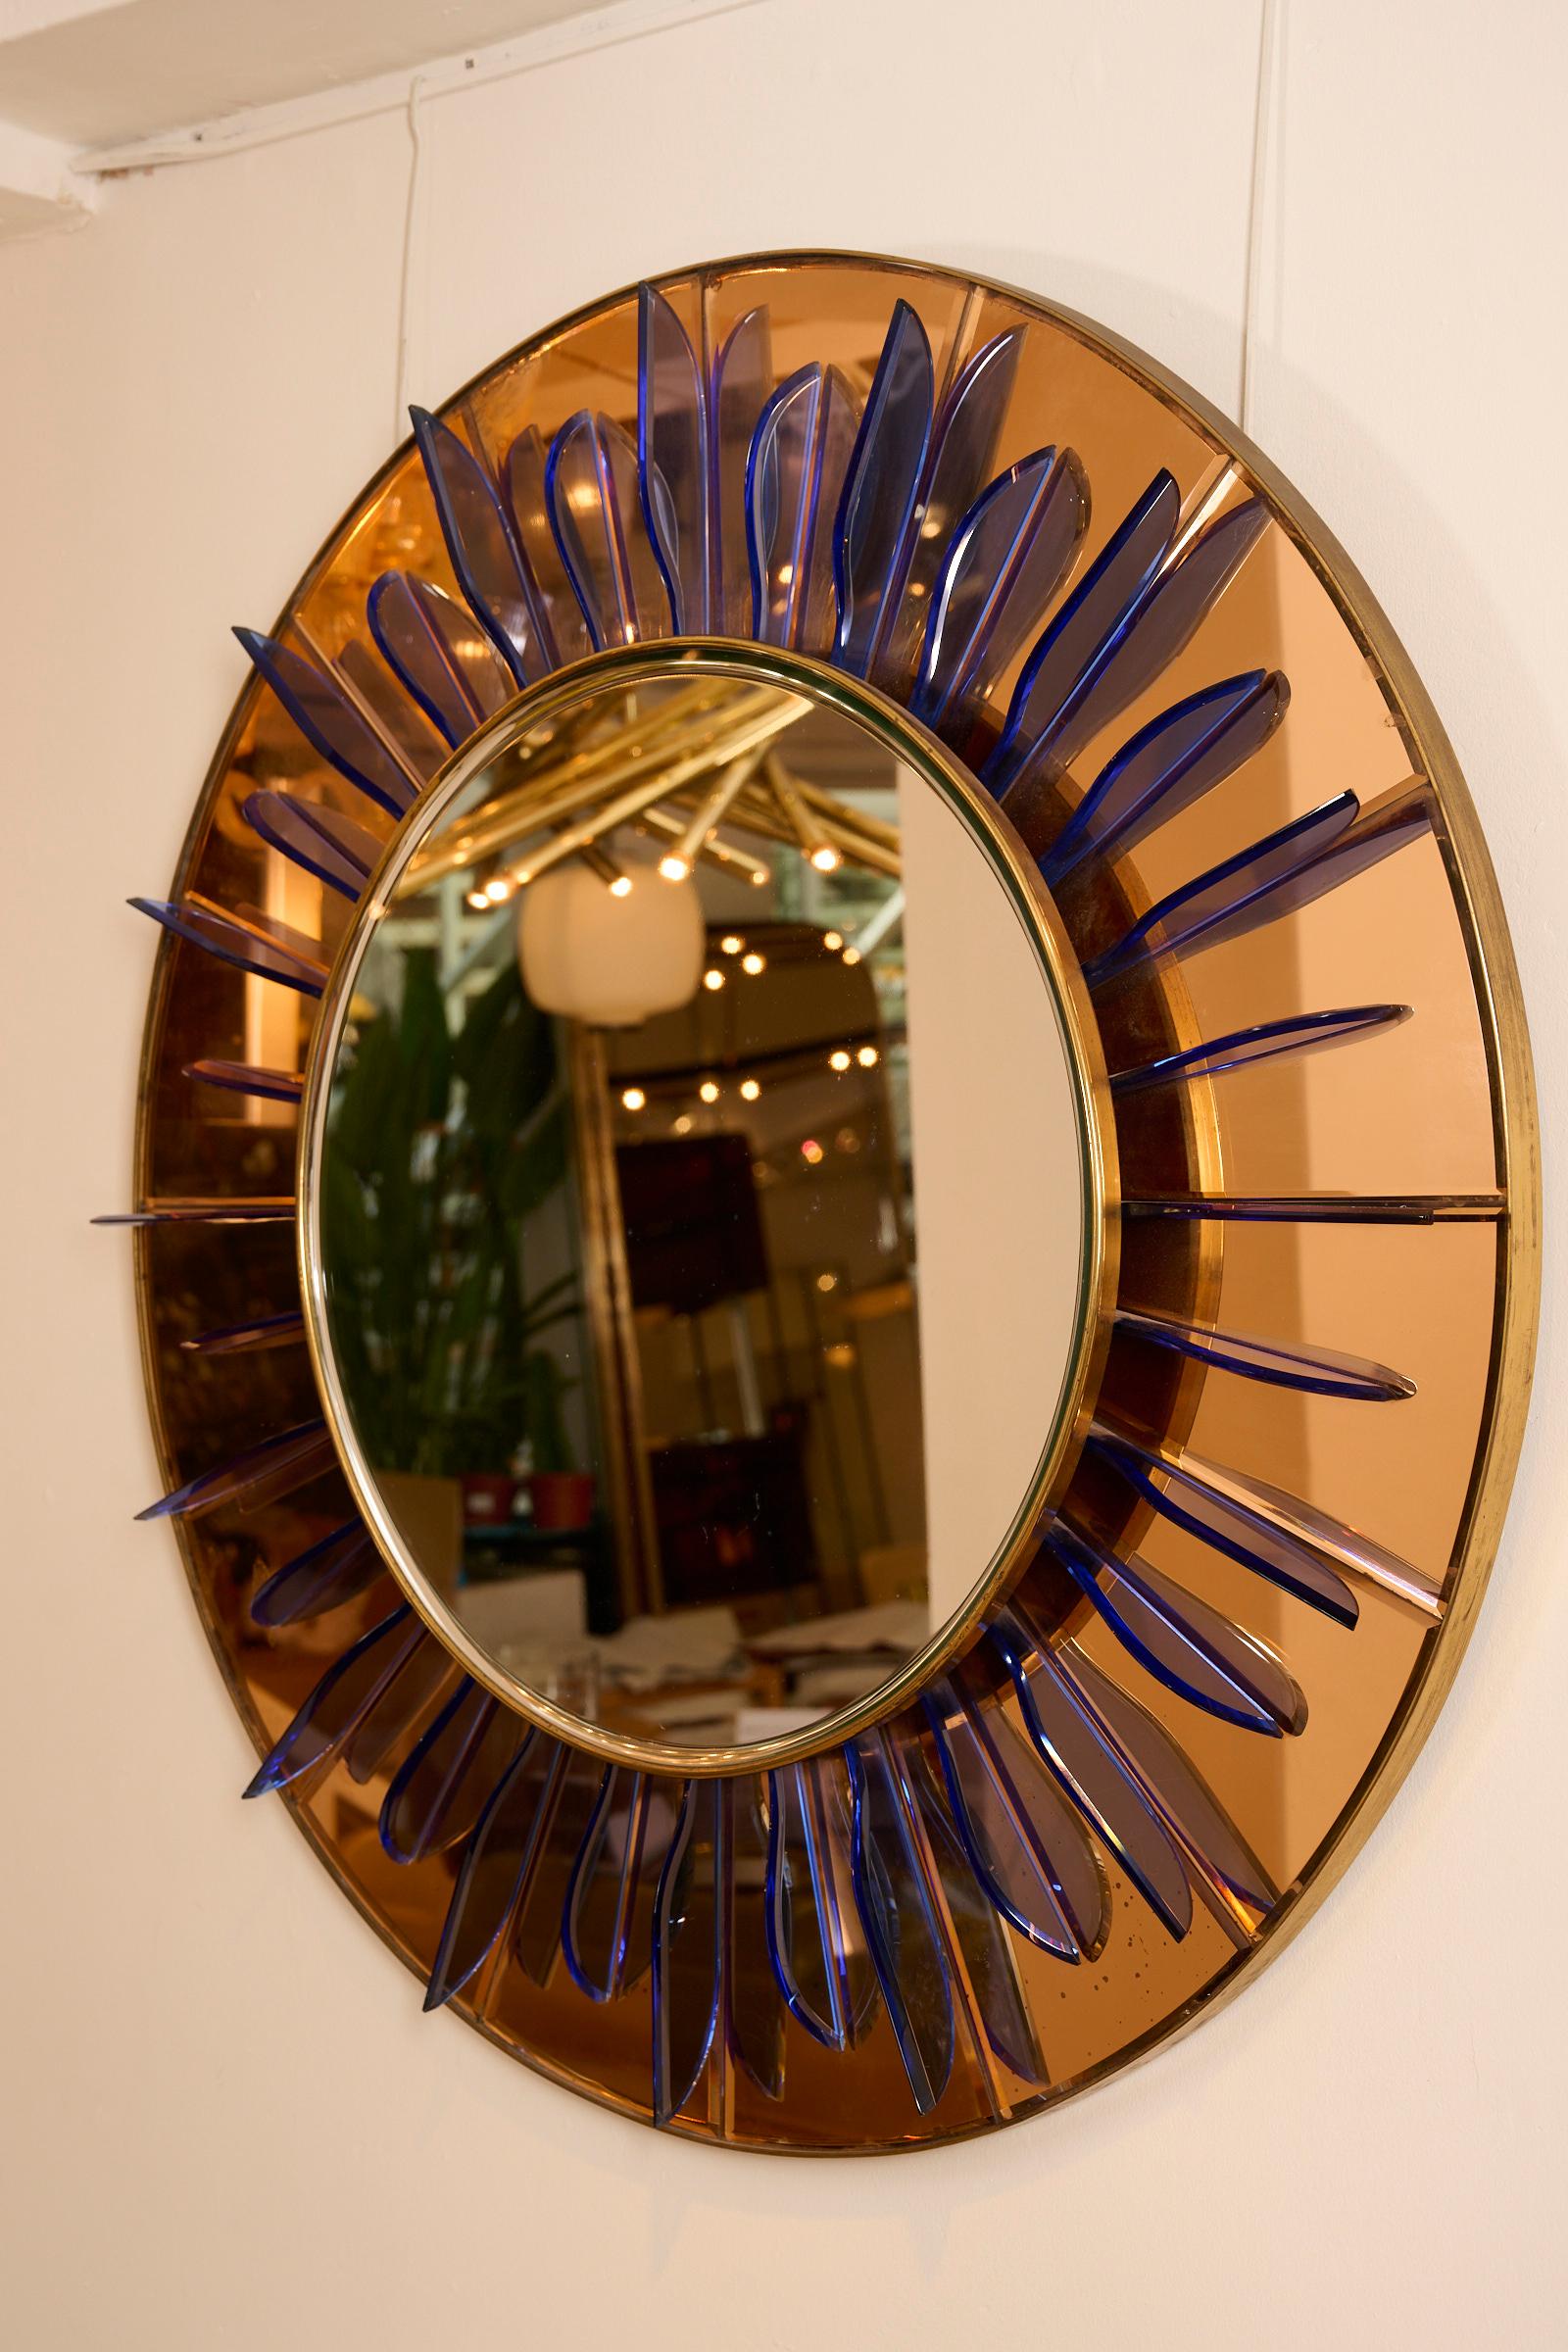 Impressive circular mirror with bevel in brass frame mounted on a peach/bronze glass with cut blue glass blades radiating from the mirror.

